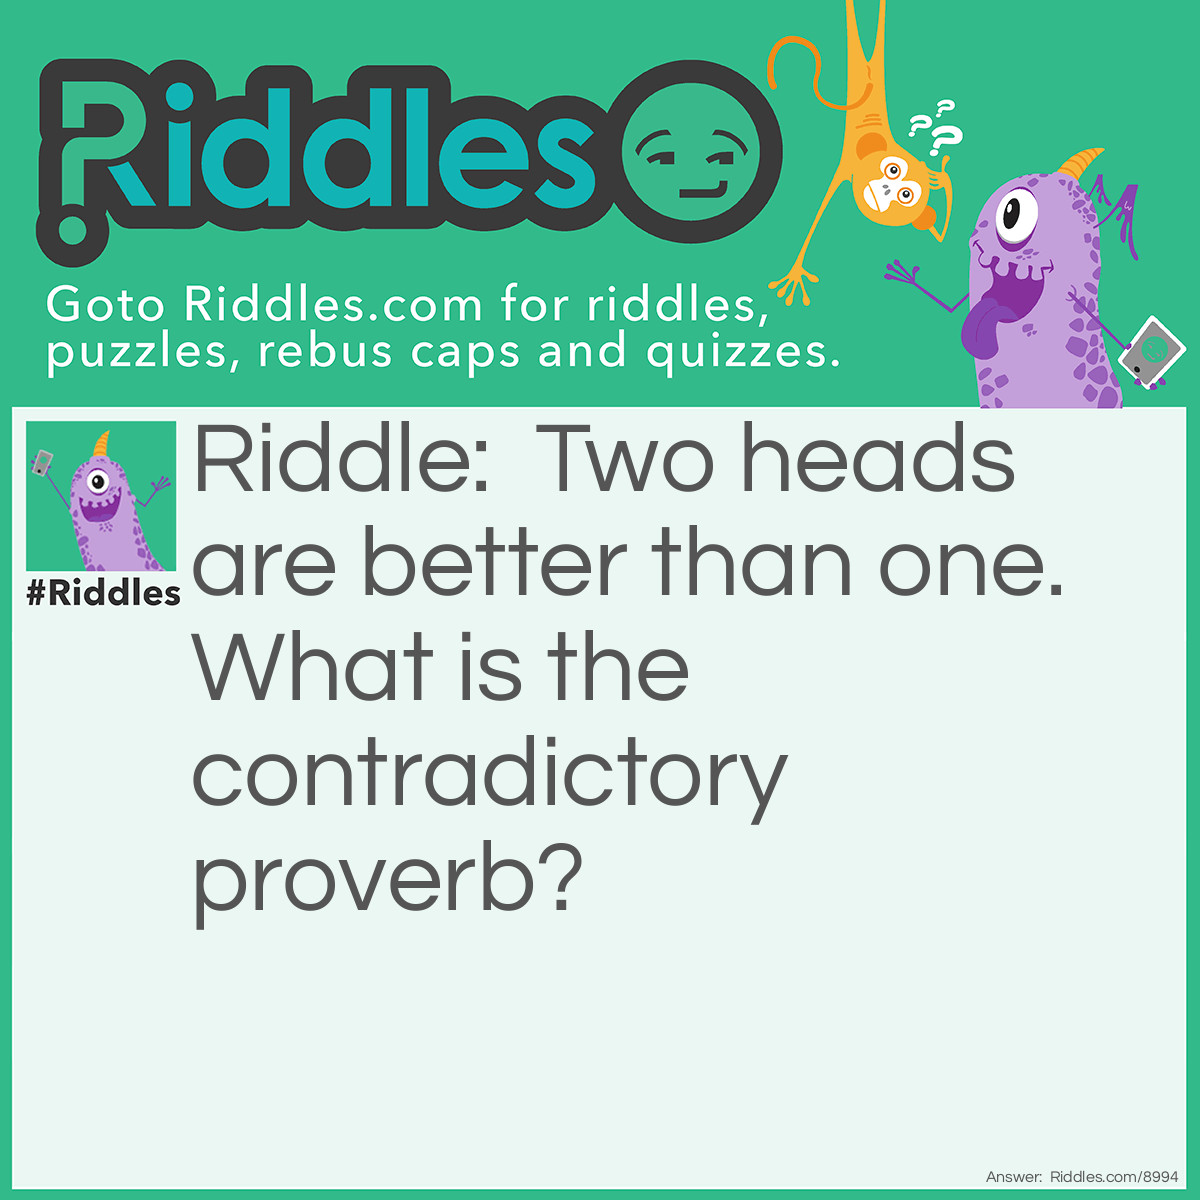 Riddle: Two heads are better than one. What is the contradictory proverb? Answer: Paddle your own canoe.